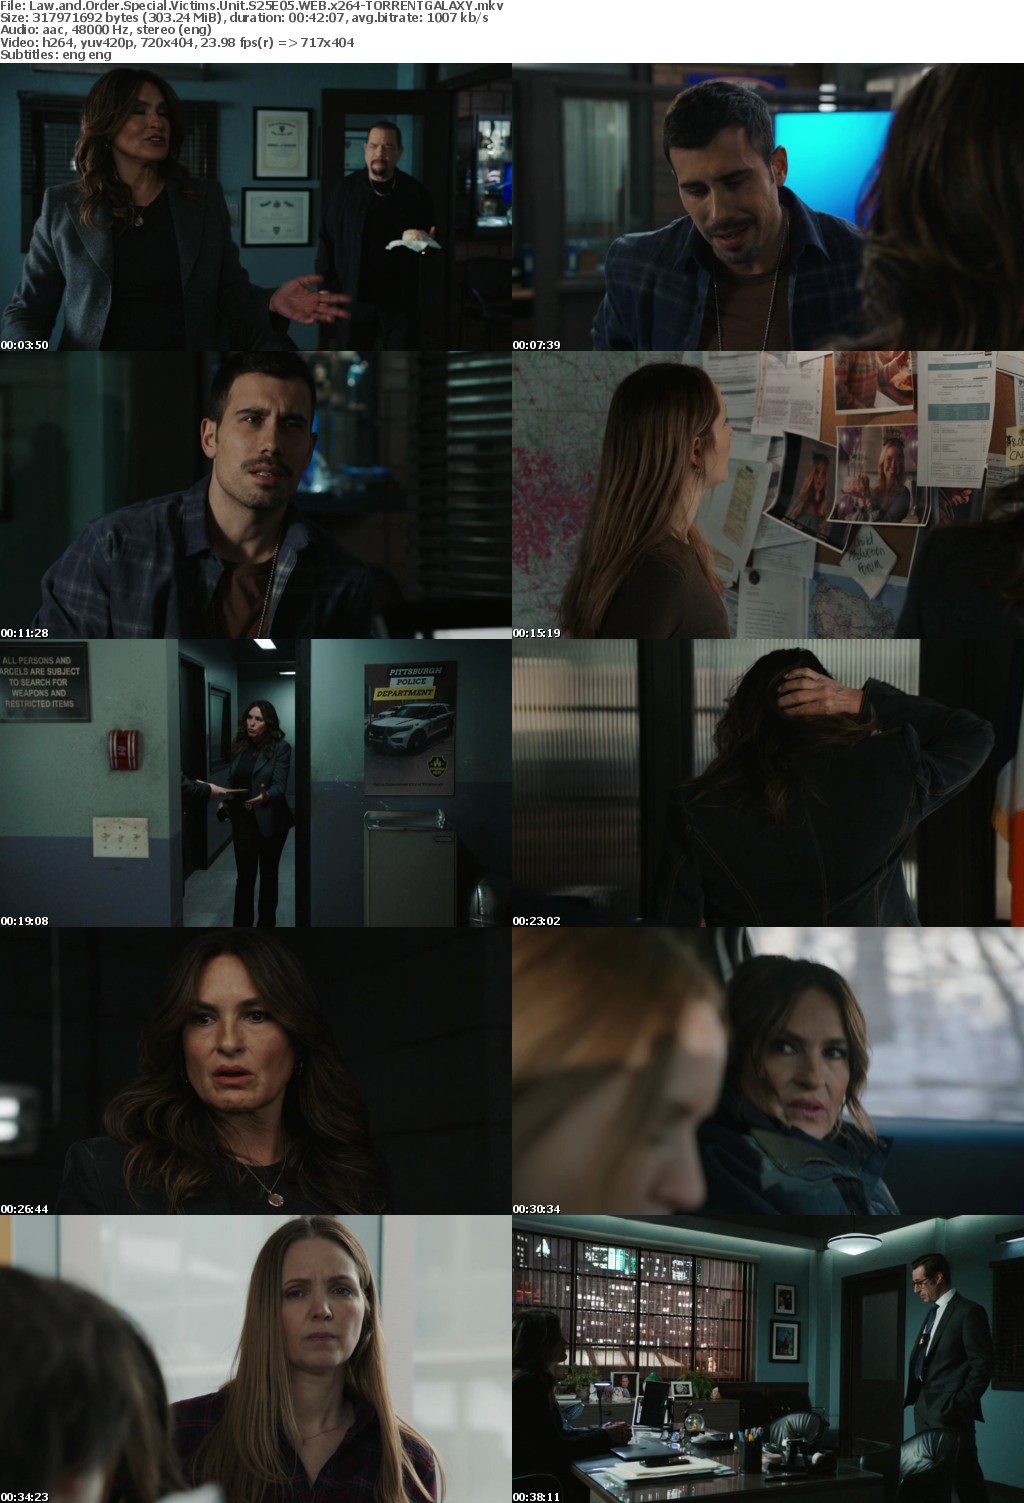 Law and Order Special Victims Unit S25E05 WEB x264-GALAXY